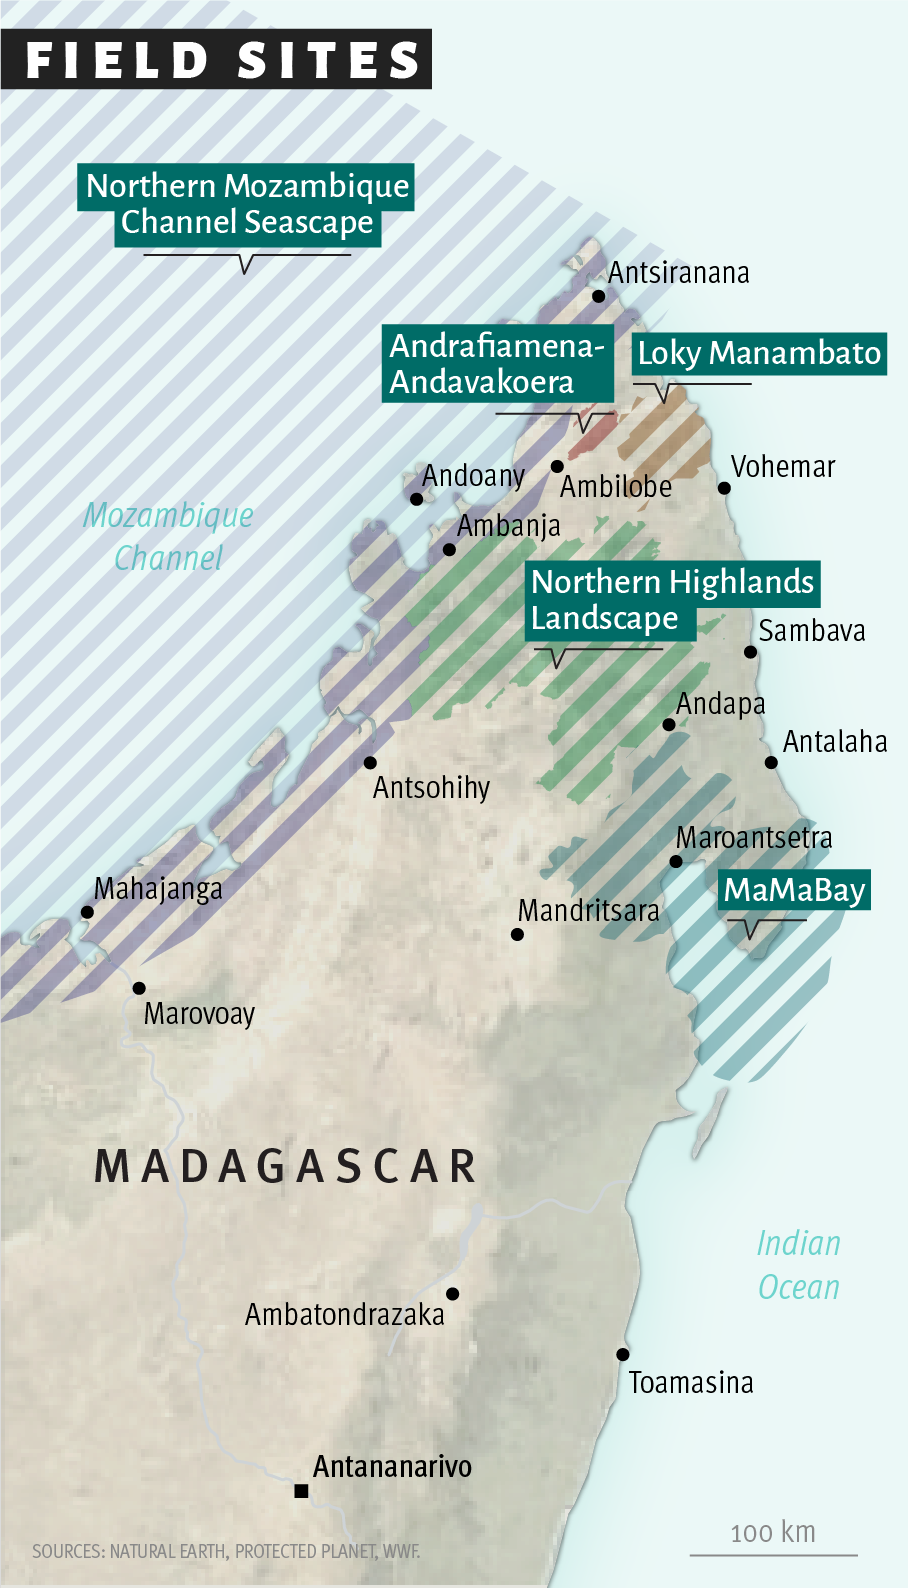 Map over field sites in Mozambique